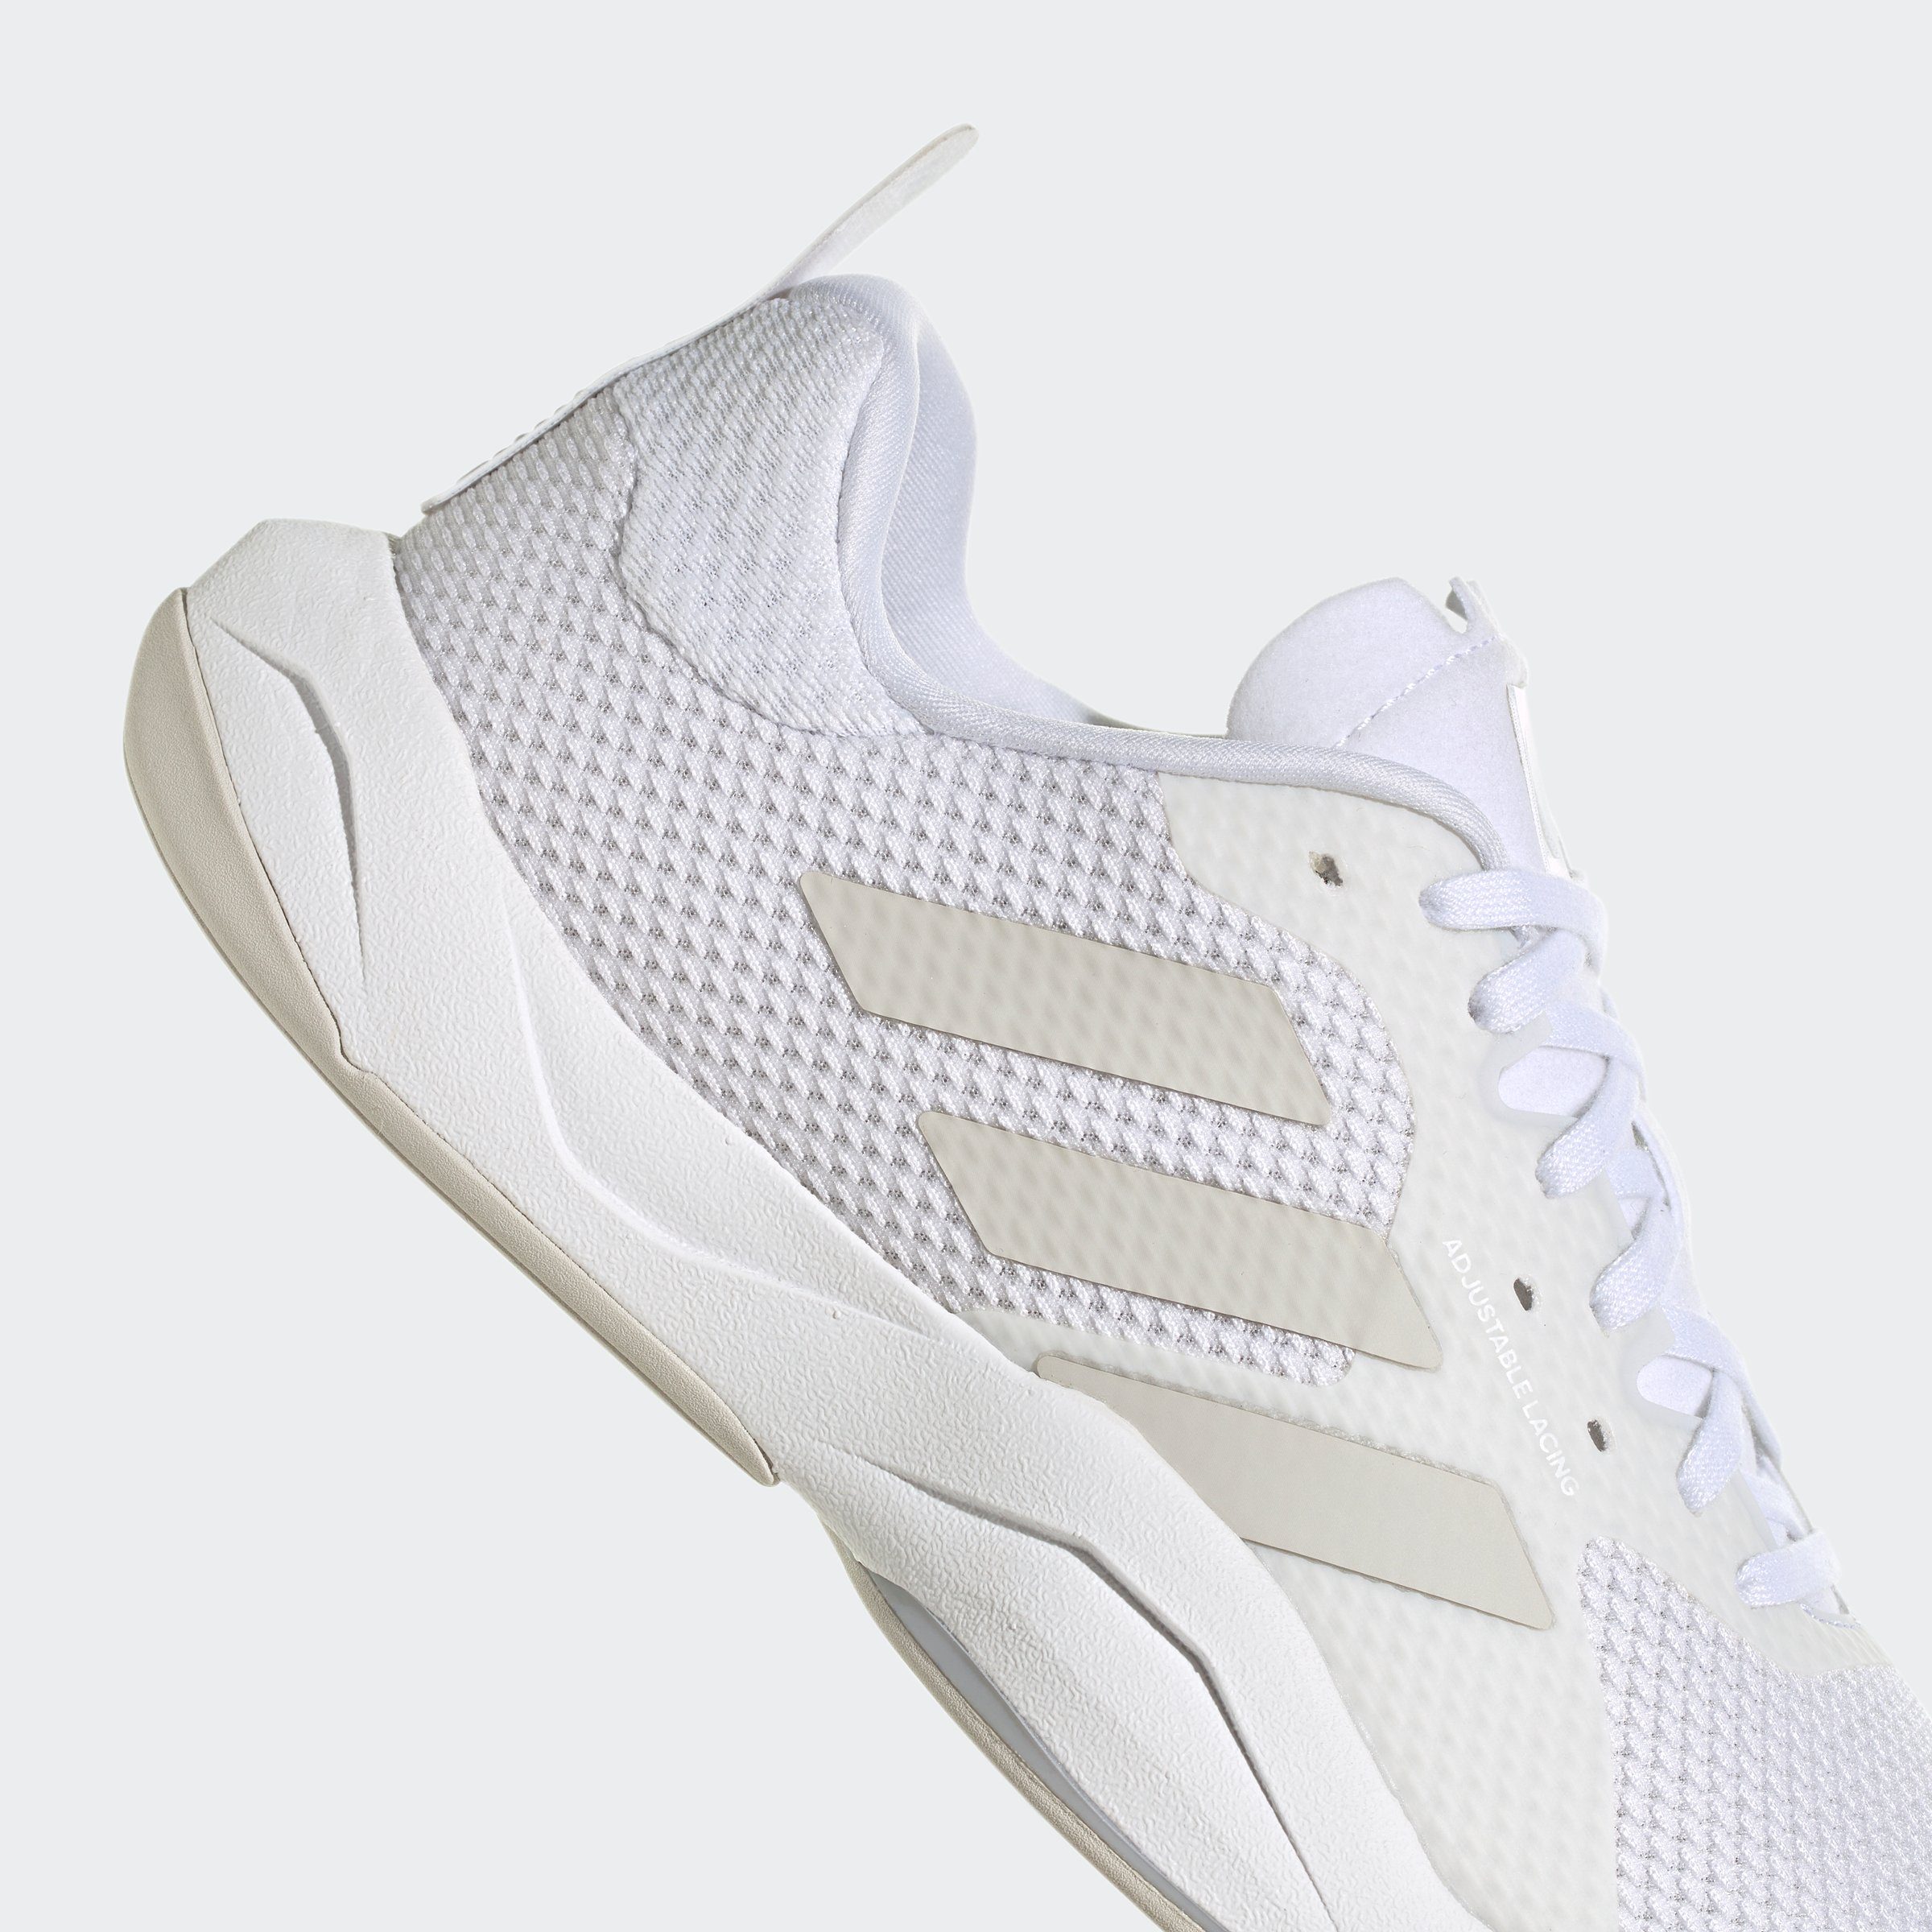 One Grey Performance Grey Fitnessschuh / RAPIDMOVE TRAININGSSCHUH Two / adidas Cloud White